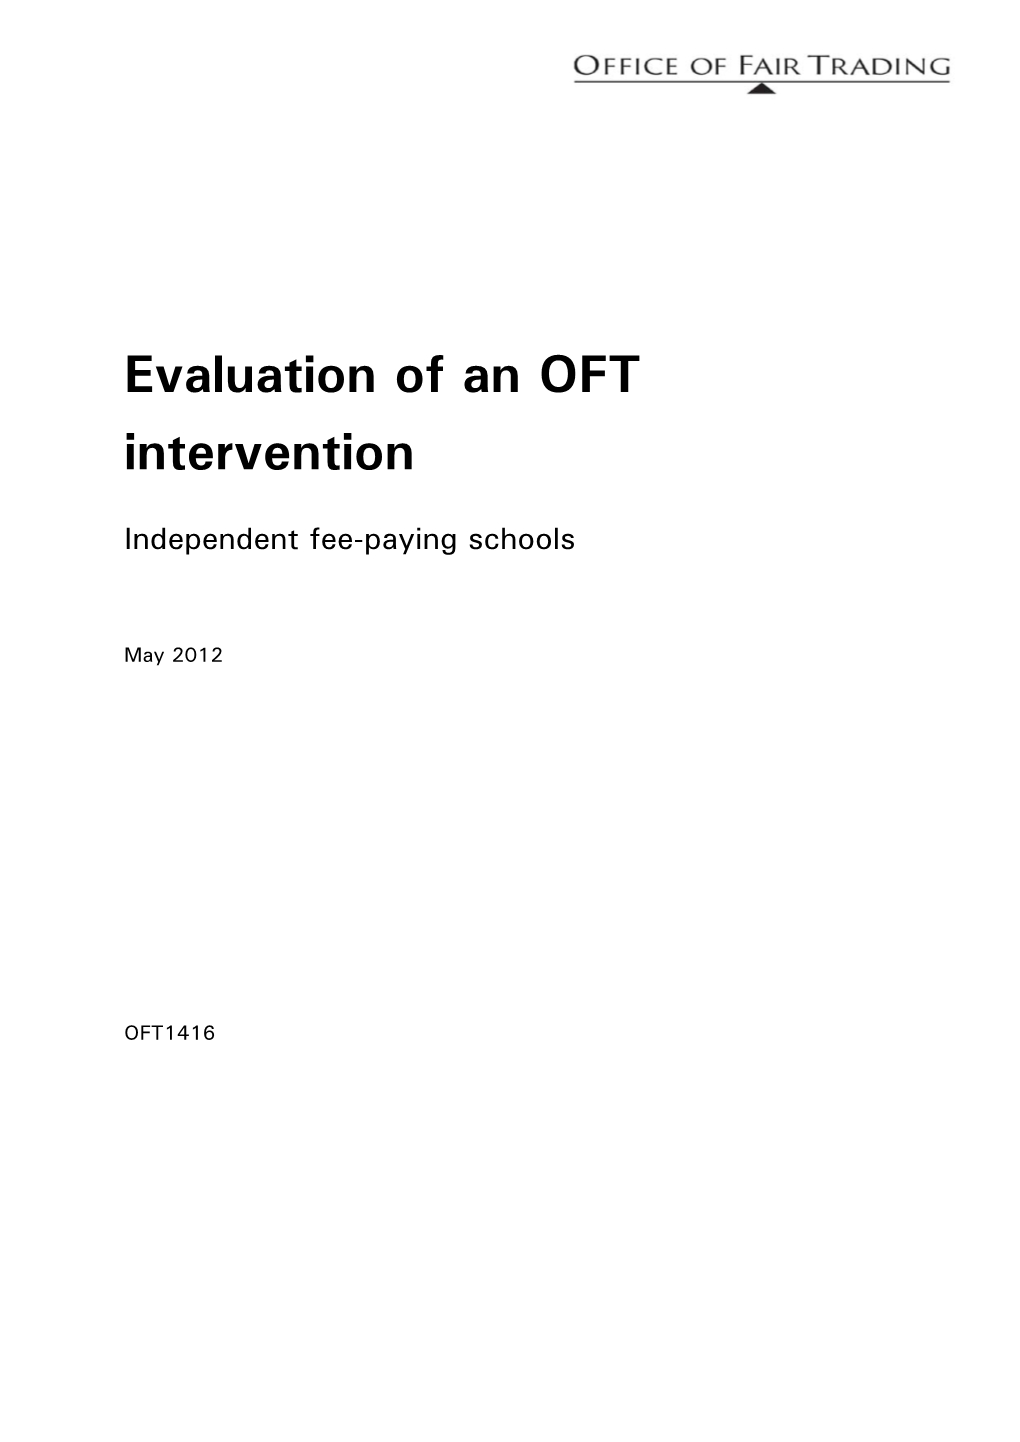 Evaluation of an OFT Intervention